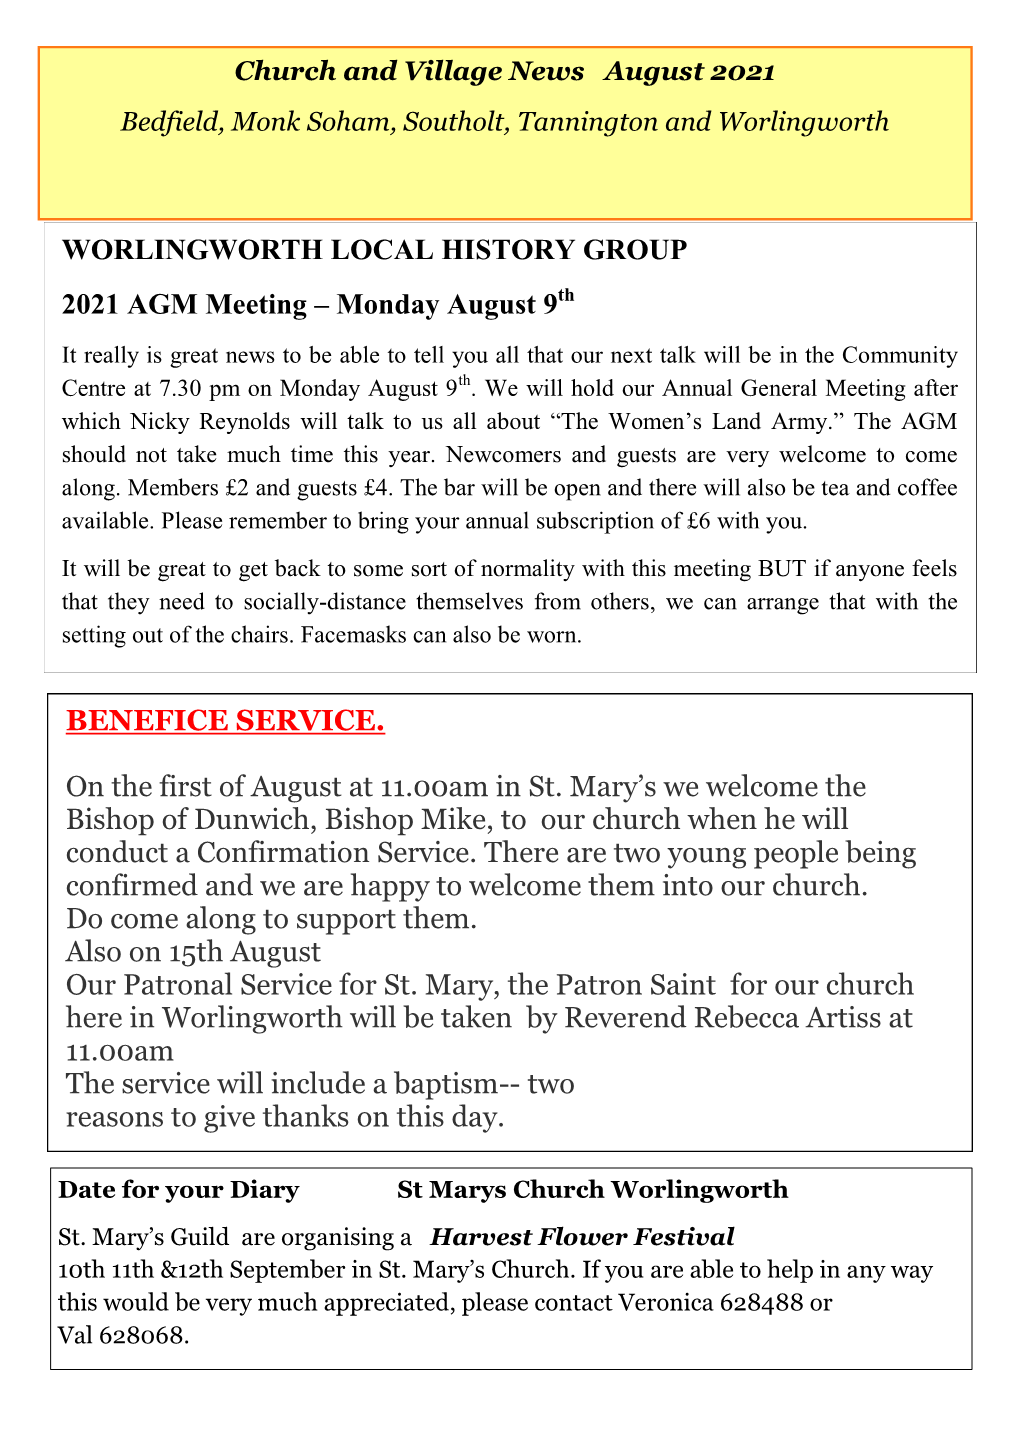 Church and Village News August 2021 Bedfield, Monk Soham, Southolt, Tannington and Worlingworth